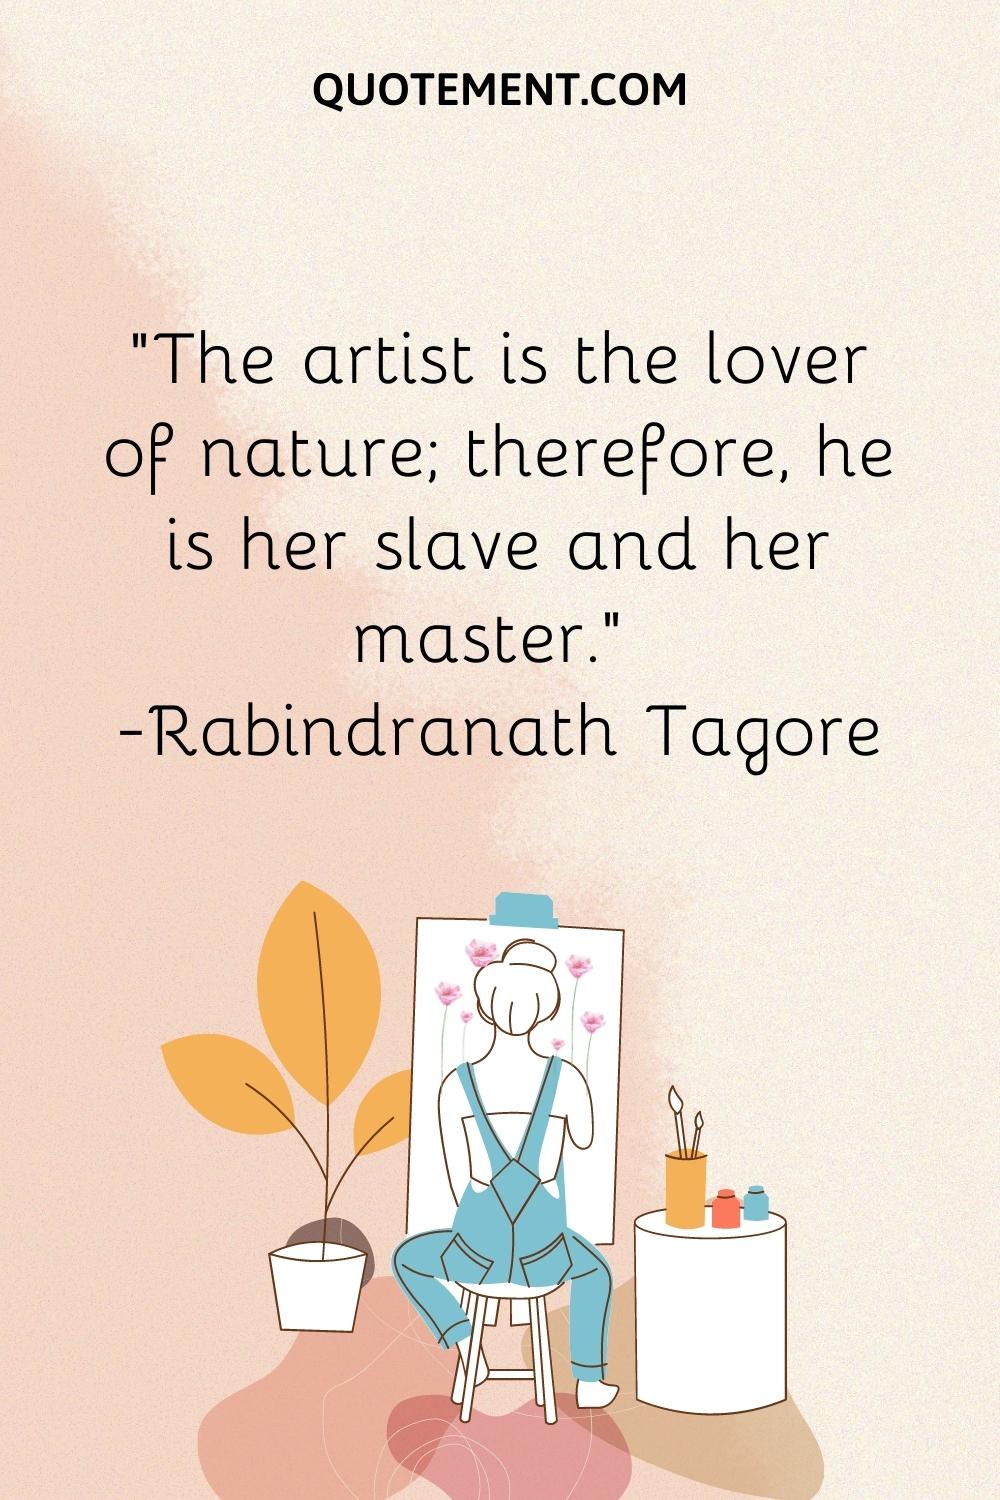 The artist is the lover of nature; therefore, he is her slave and her master